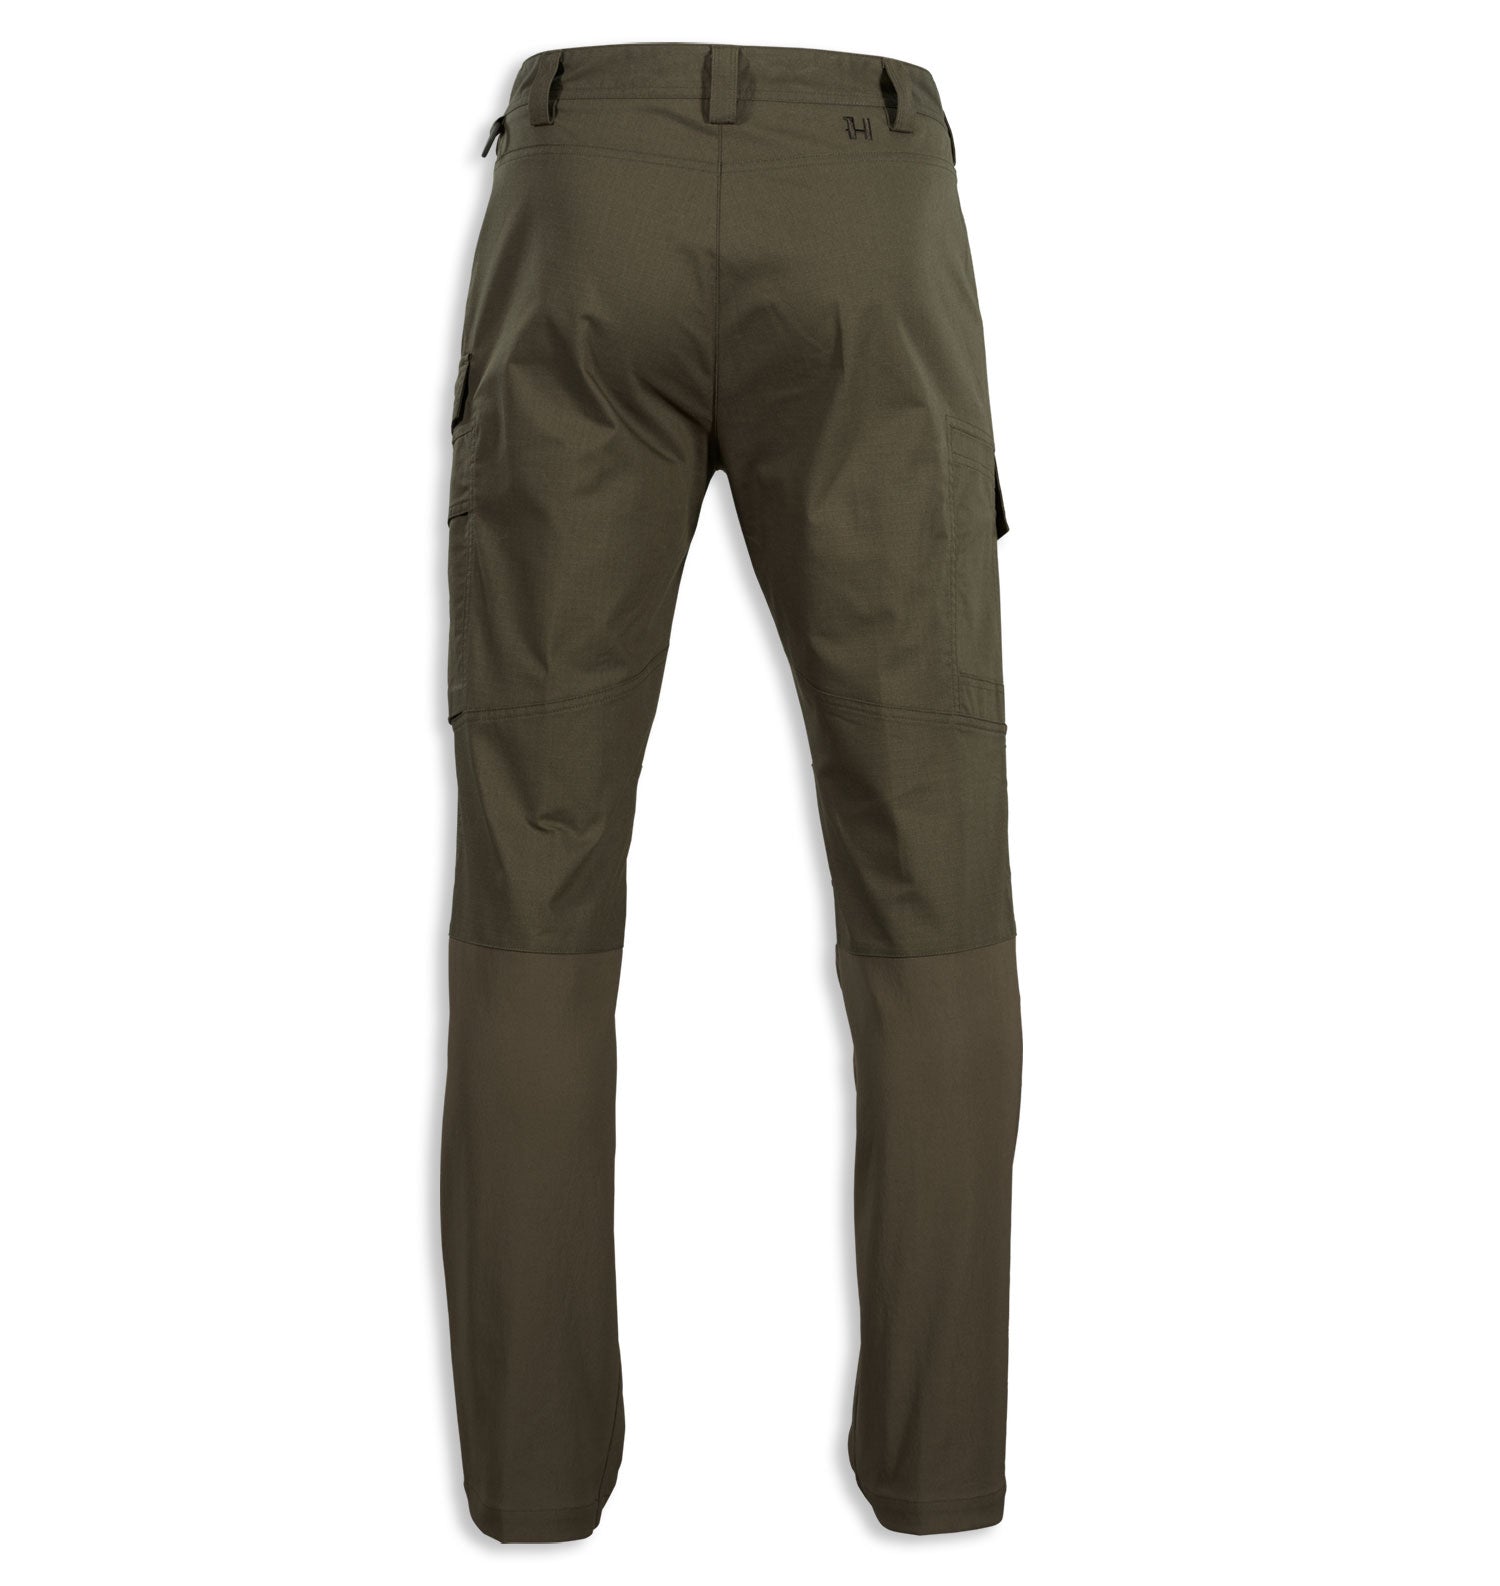 Driven Hunt HWS Leather Trousers by Harkila | Leather trousers, Windproof,  High quality leather